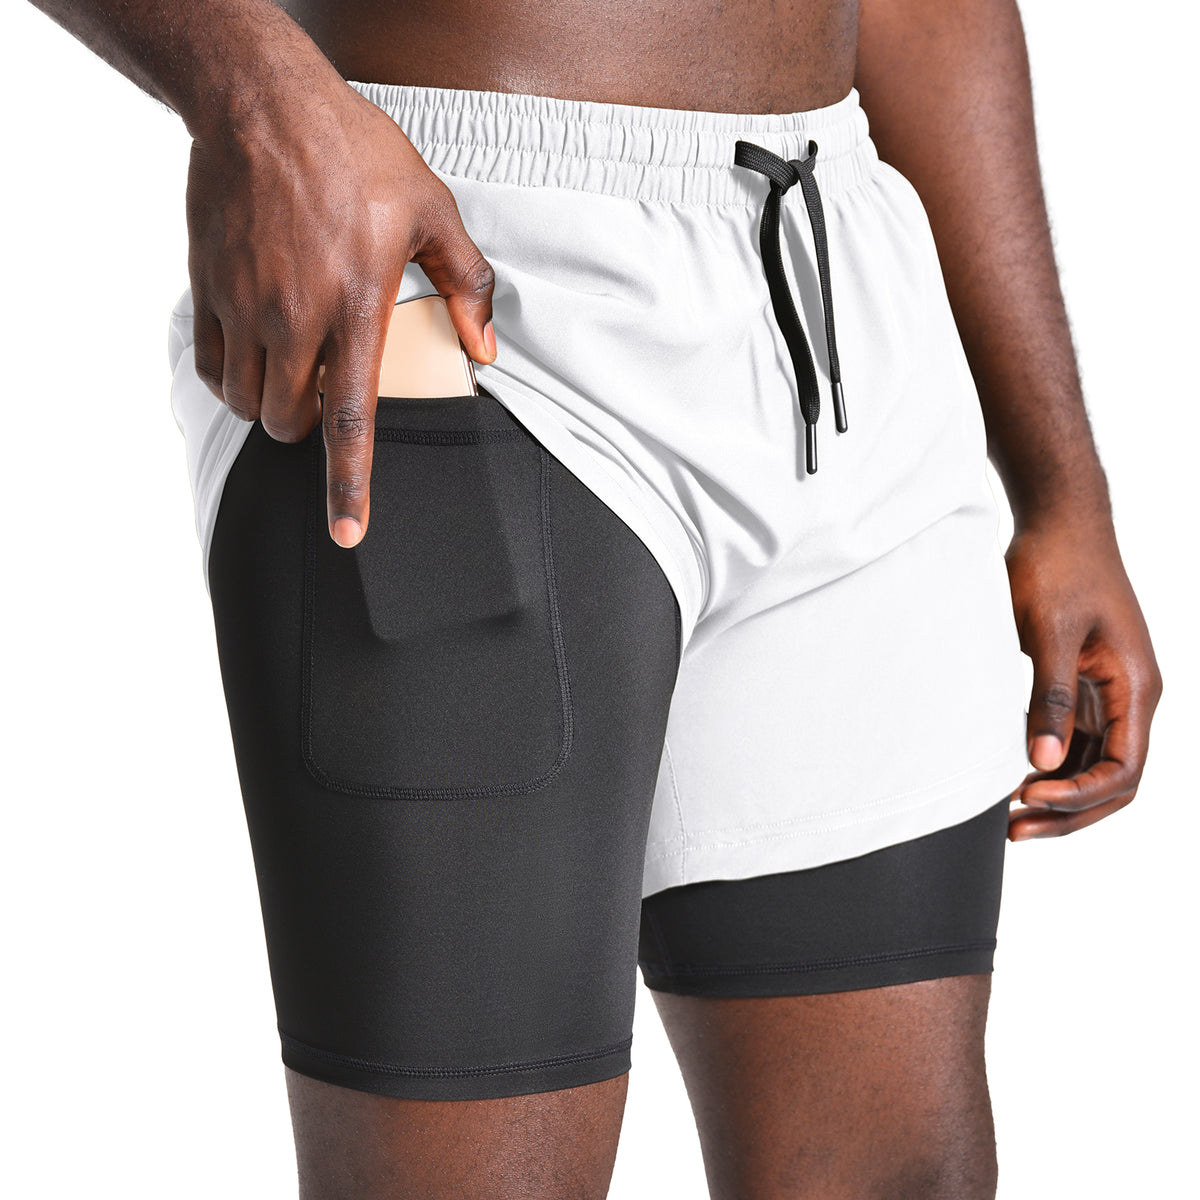 MEN’S SHORTS WITH POCKET ISM-P5 - CABRALLY